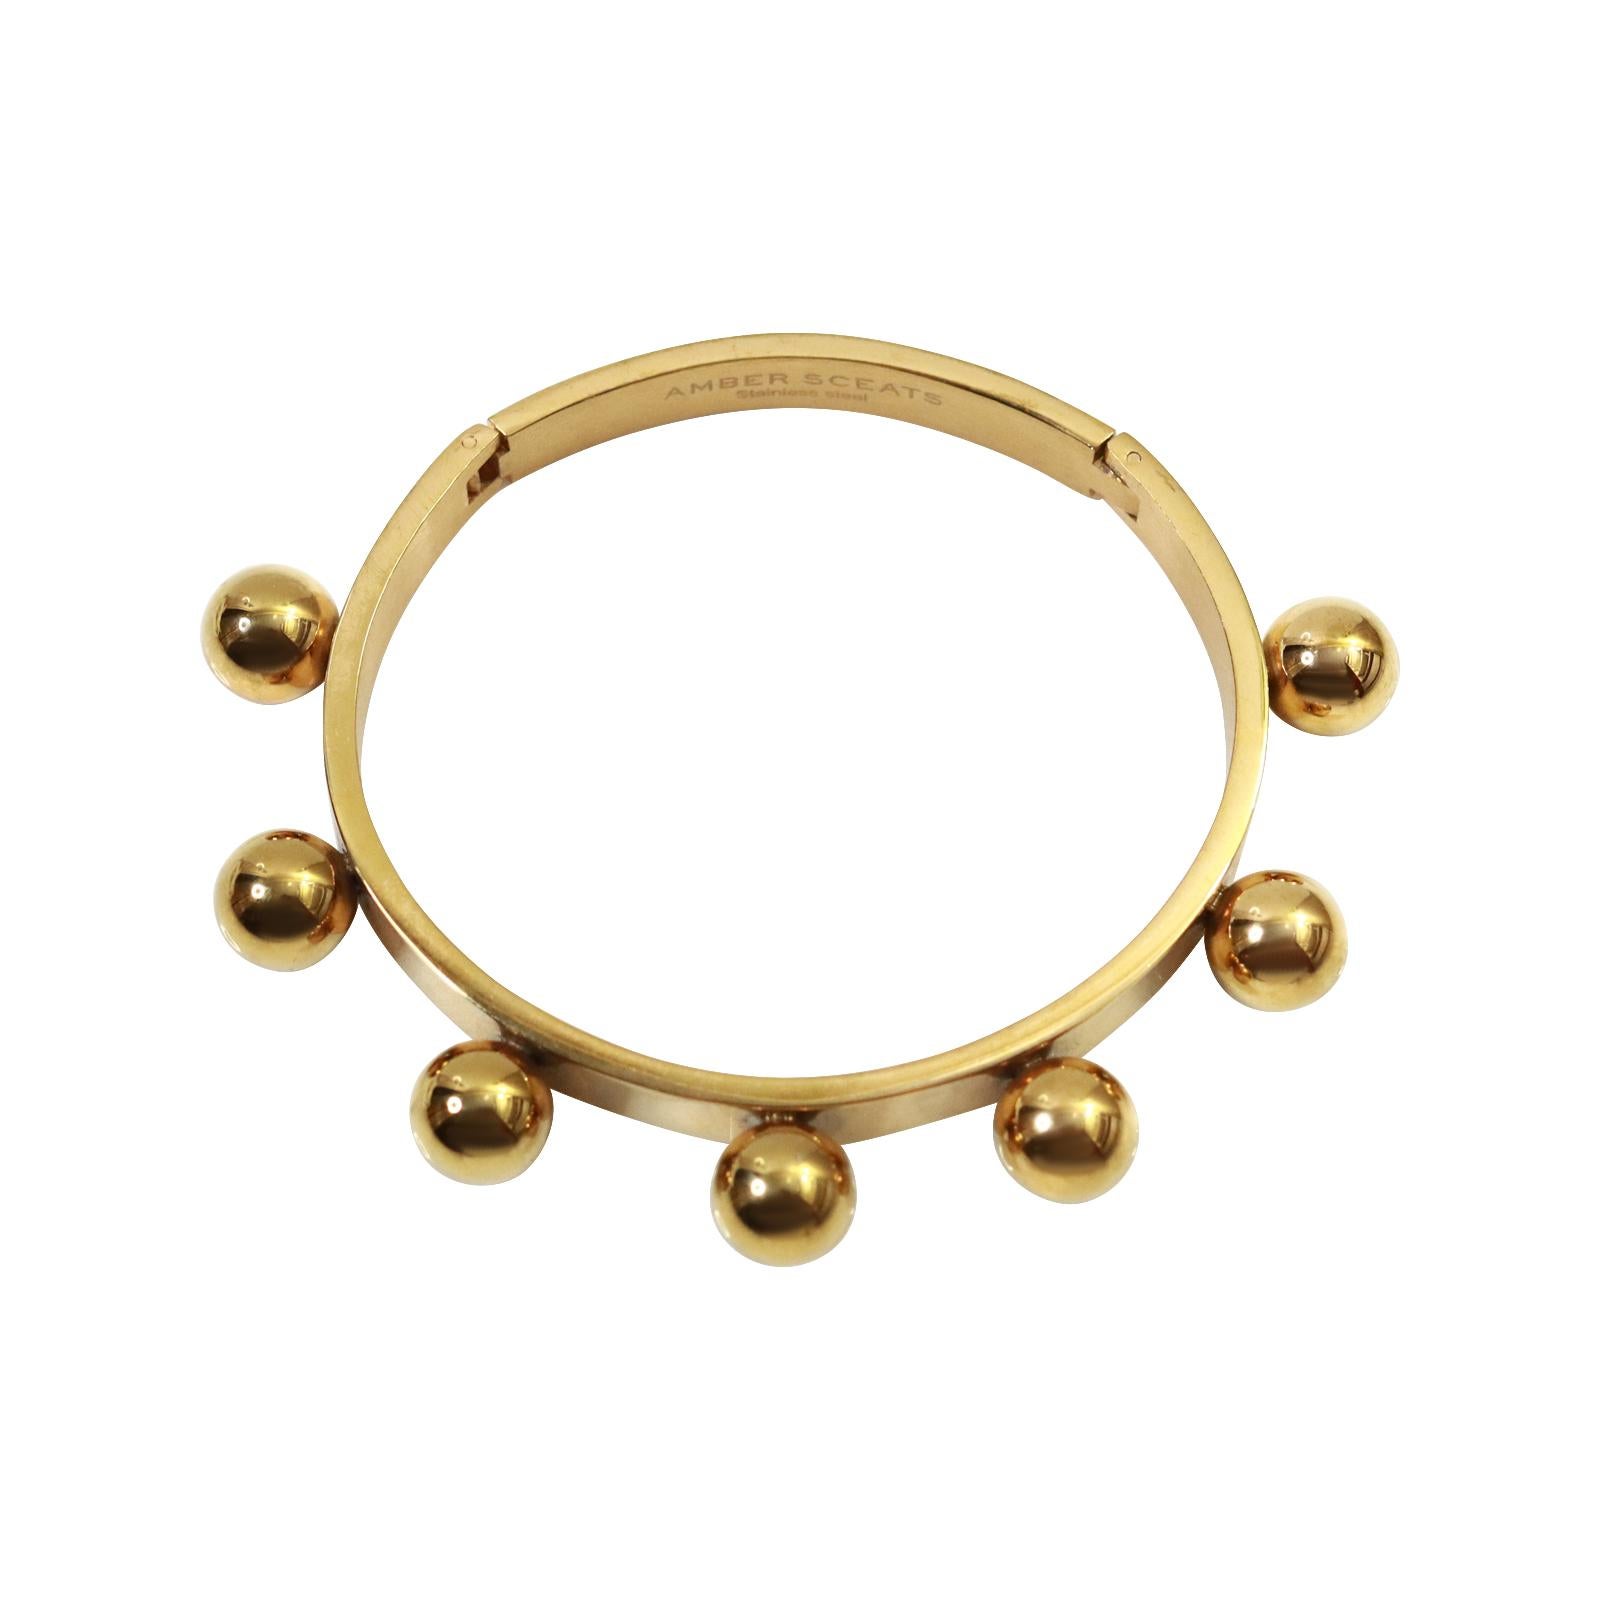 Vintage Gold Tone Heavy Bracelet With Fixed Balls Circa 1990s.  This bracelet reminds me of what a Cartier would look like or something to that level.  It is substantial and well made. It has a groove and a hidden tongue that pulls tight to lock it